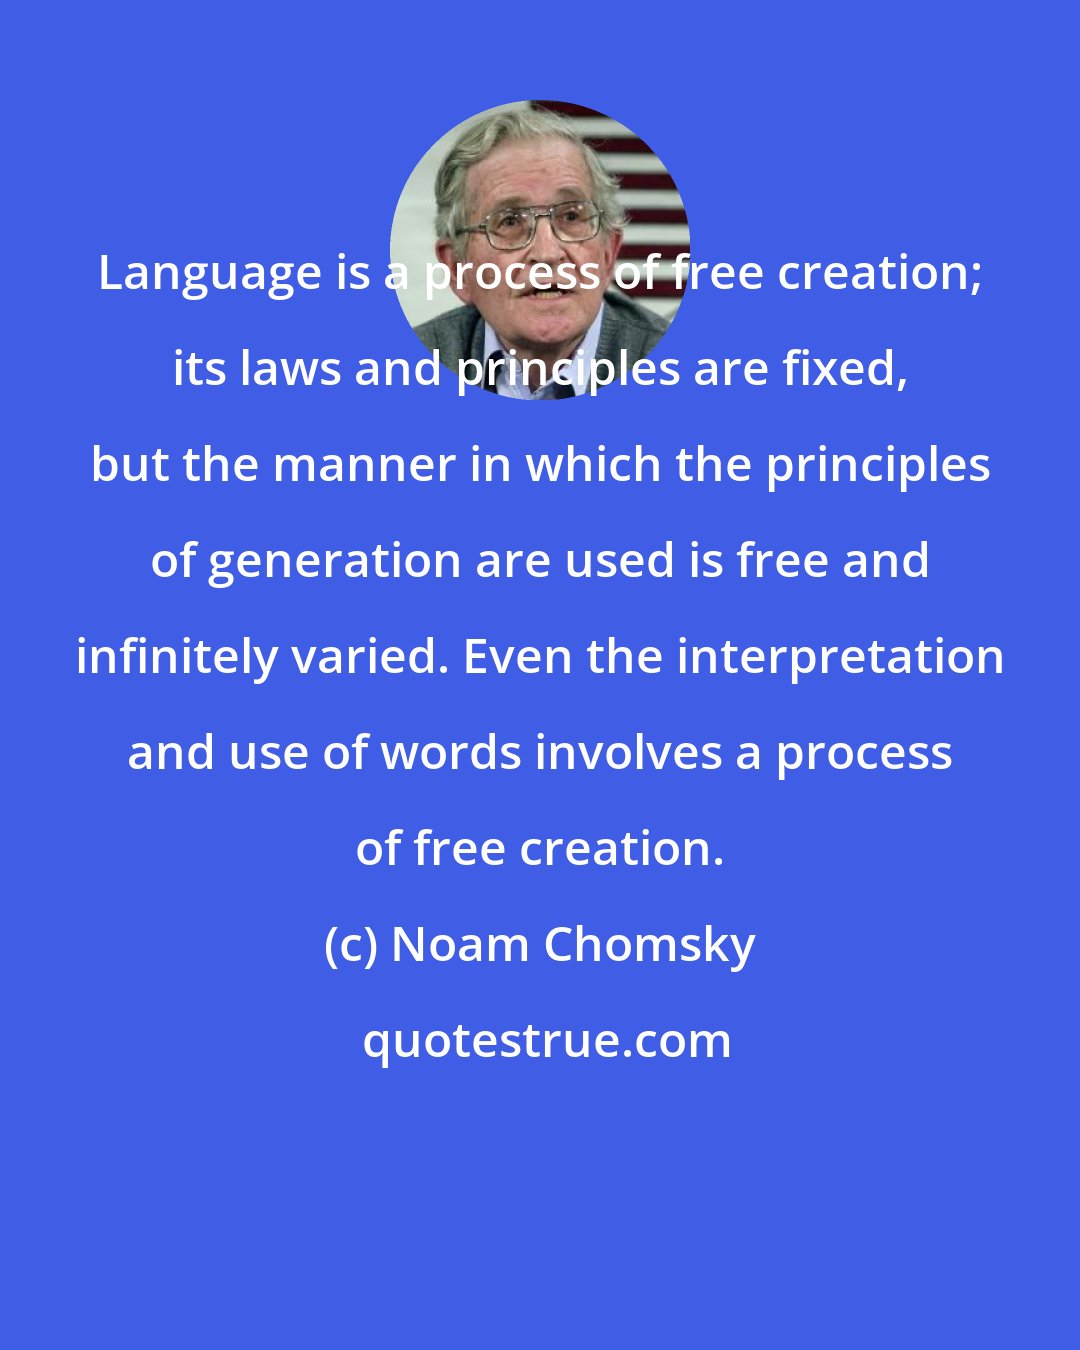 Noam Chomsky: Language is a process of free creation; its laws and principles are fixed, but the manner in which the principles of generation are used is free and infinitely varied. Even the interpretation and use of words involves a process of free creation.